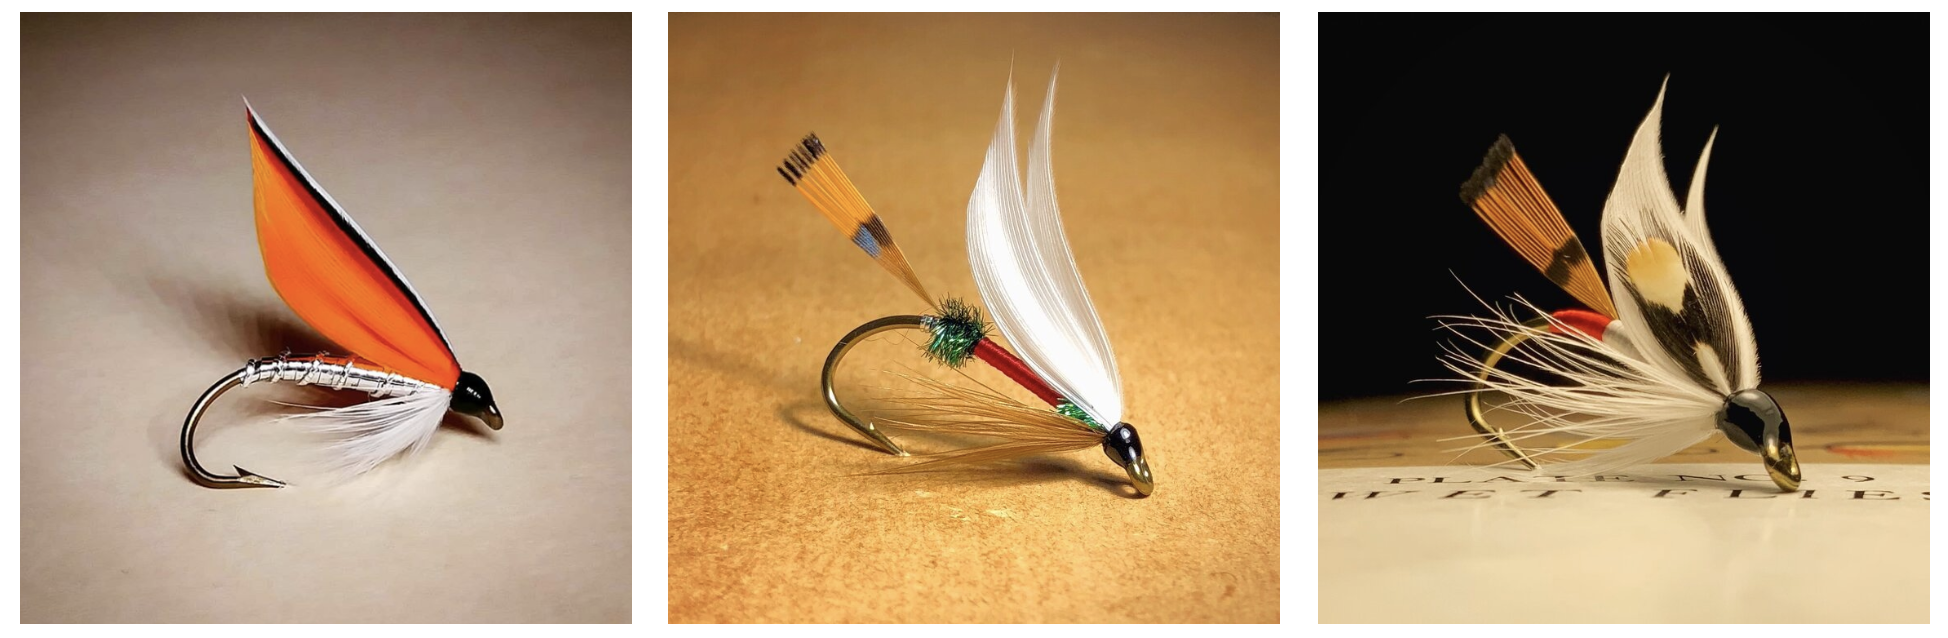 WFS 121 - Classic Wet Flies & Fly Tying with Fred Klein - Ray Bergman,  American Angler, Brook Trout, Maine, Davie McPhail - Wet Fly Swing